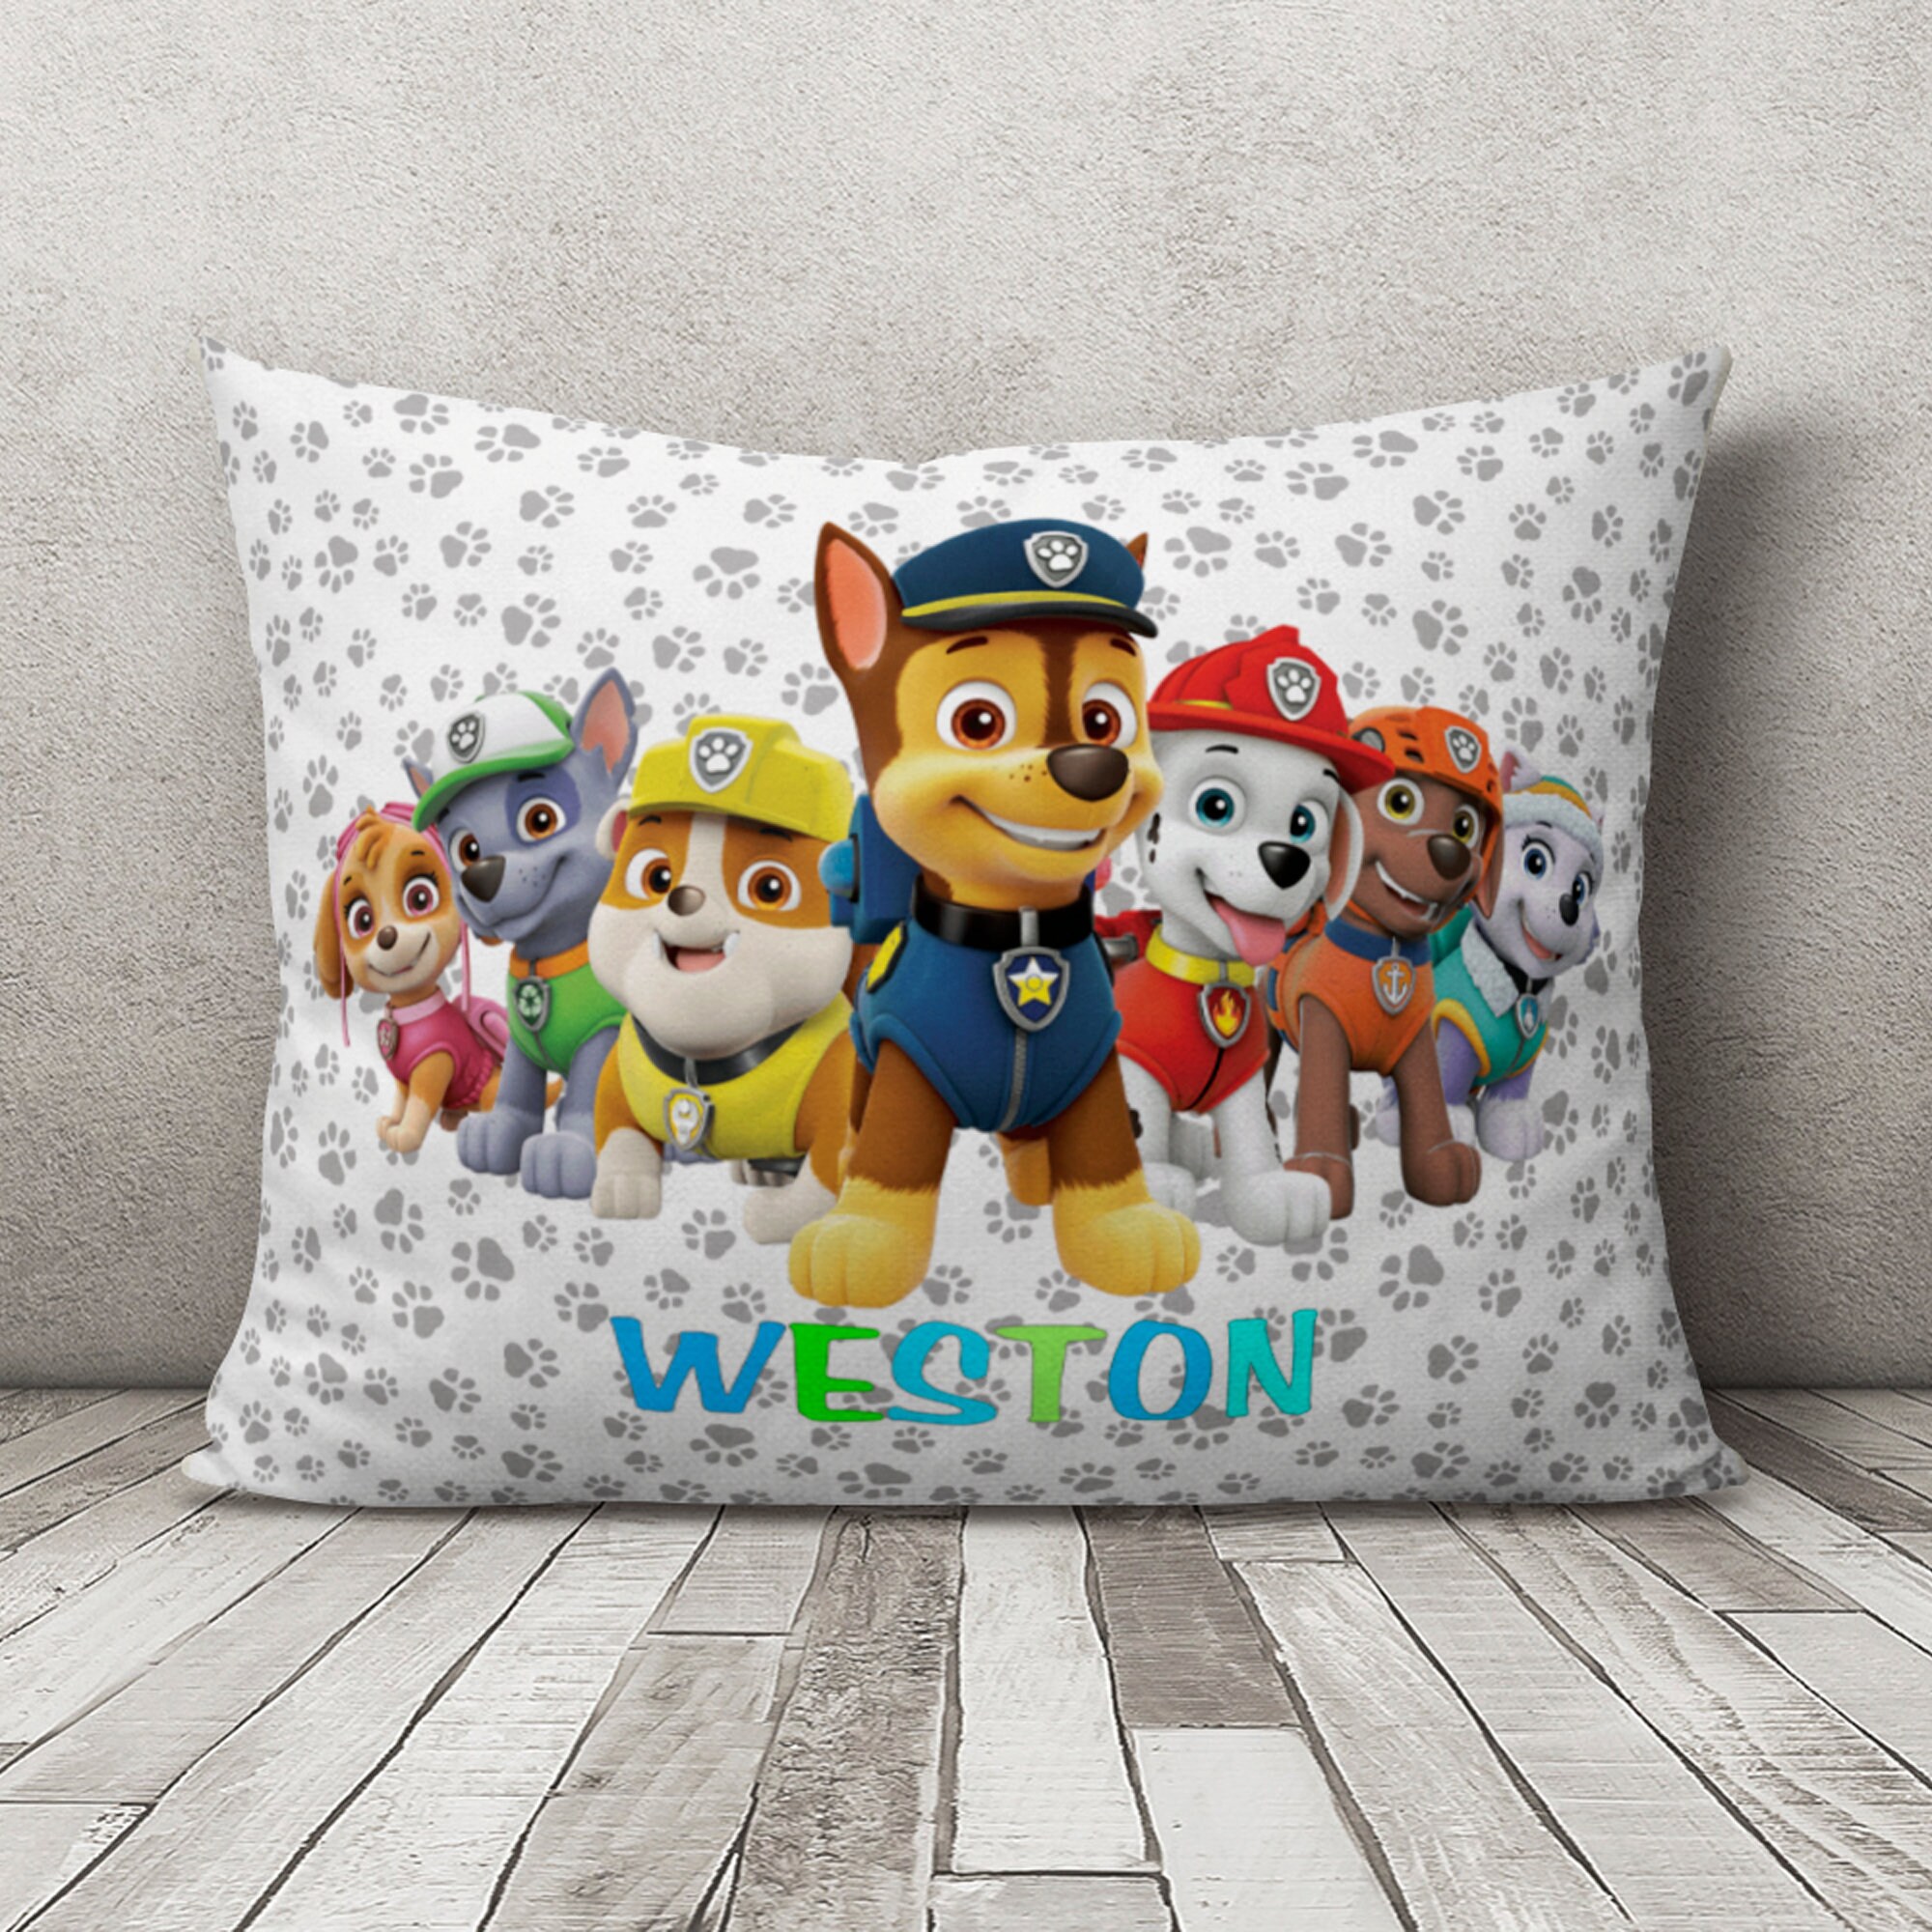 Baby Room birthday gift personalized pillow case Toddler Room Kids Bedroom Shimmer and Shine pillow case boys bedroom Childrens Pillow Case 